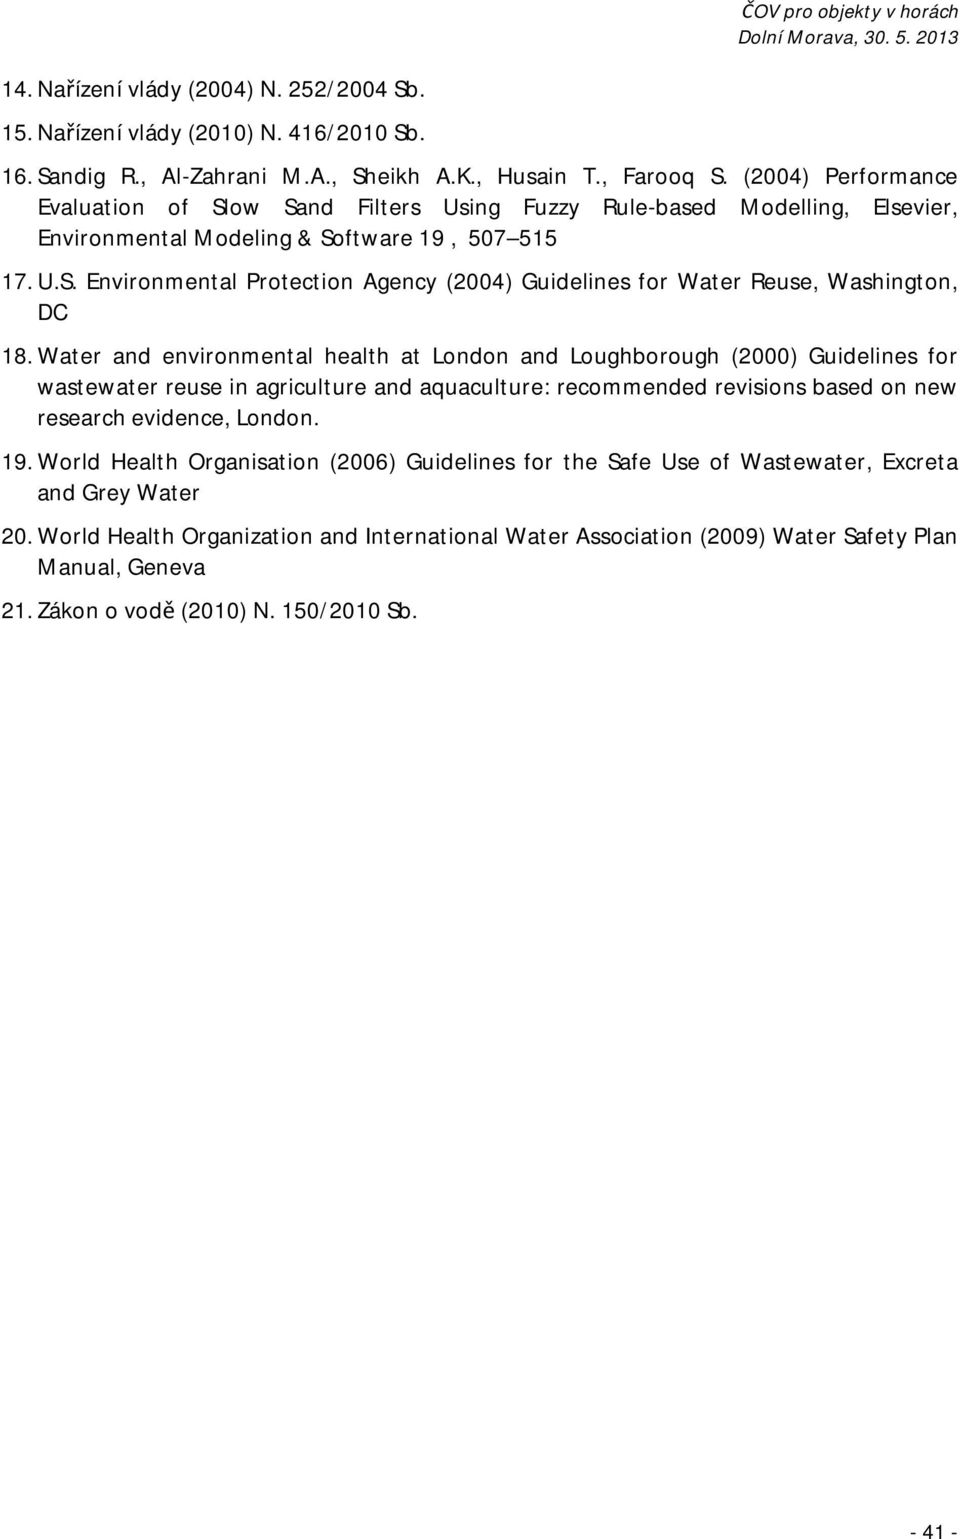 Water and environmental health at London and Loughborough (2000) Guidelines for wastewater reuse in agriculture and aquaculture: recommended revisions based on new research evidence, London. 19.